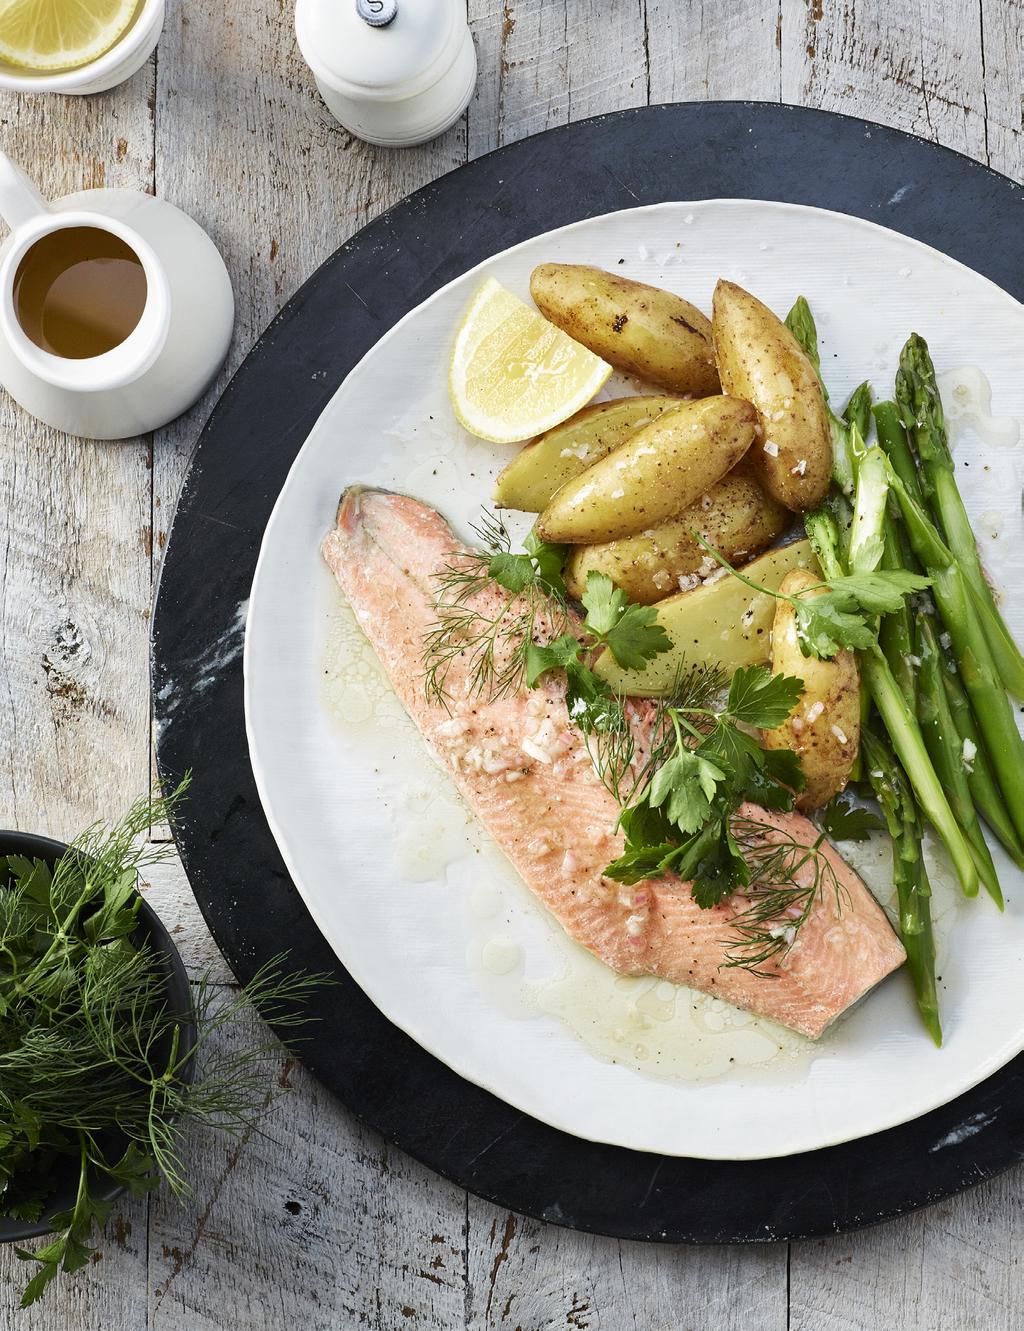 Steamed Trout, Potatoes and Asparagus with Lemon-Eshallot